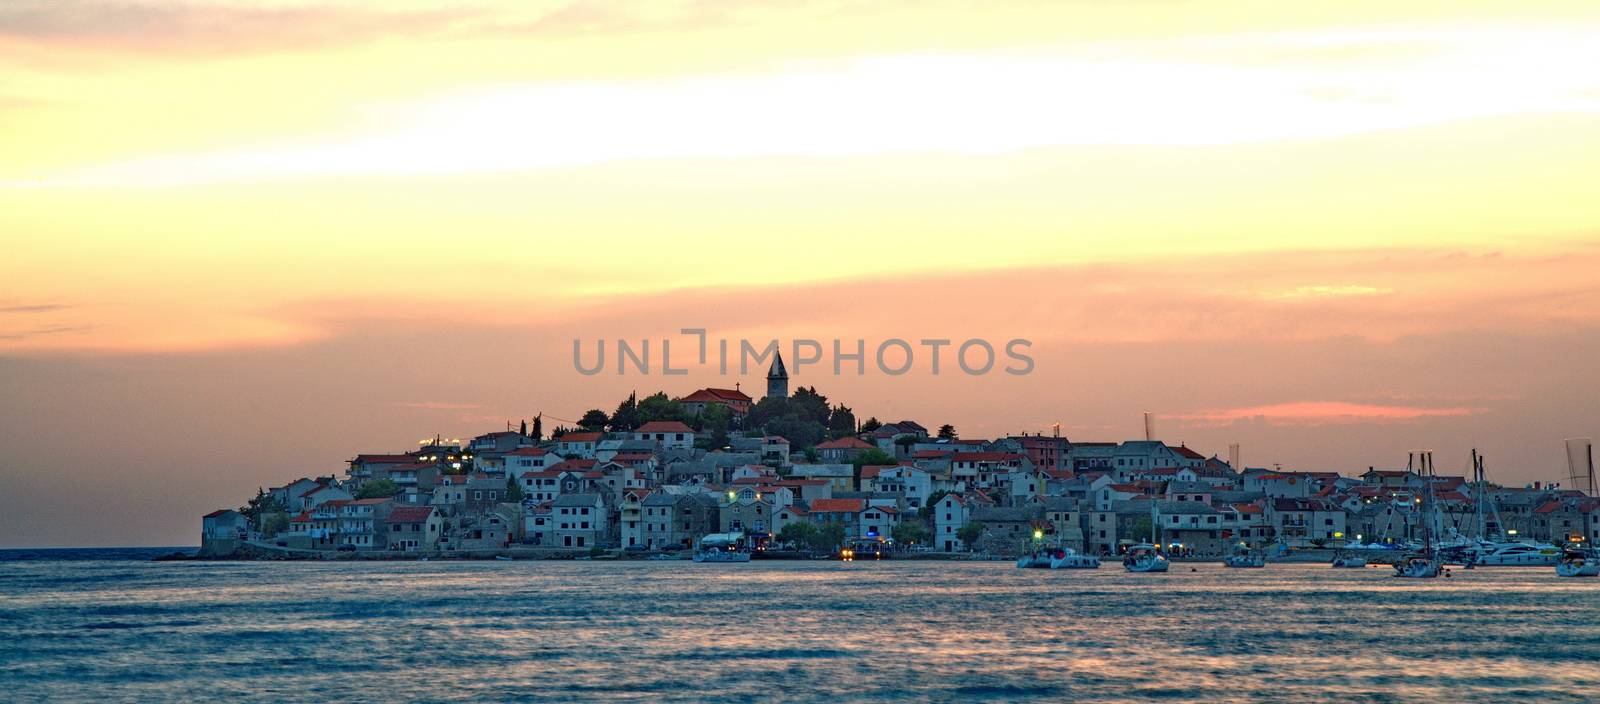 City of Primosten in Croatia at sunset by anderm